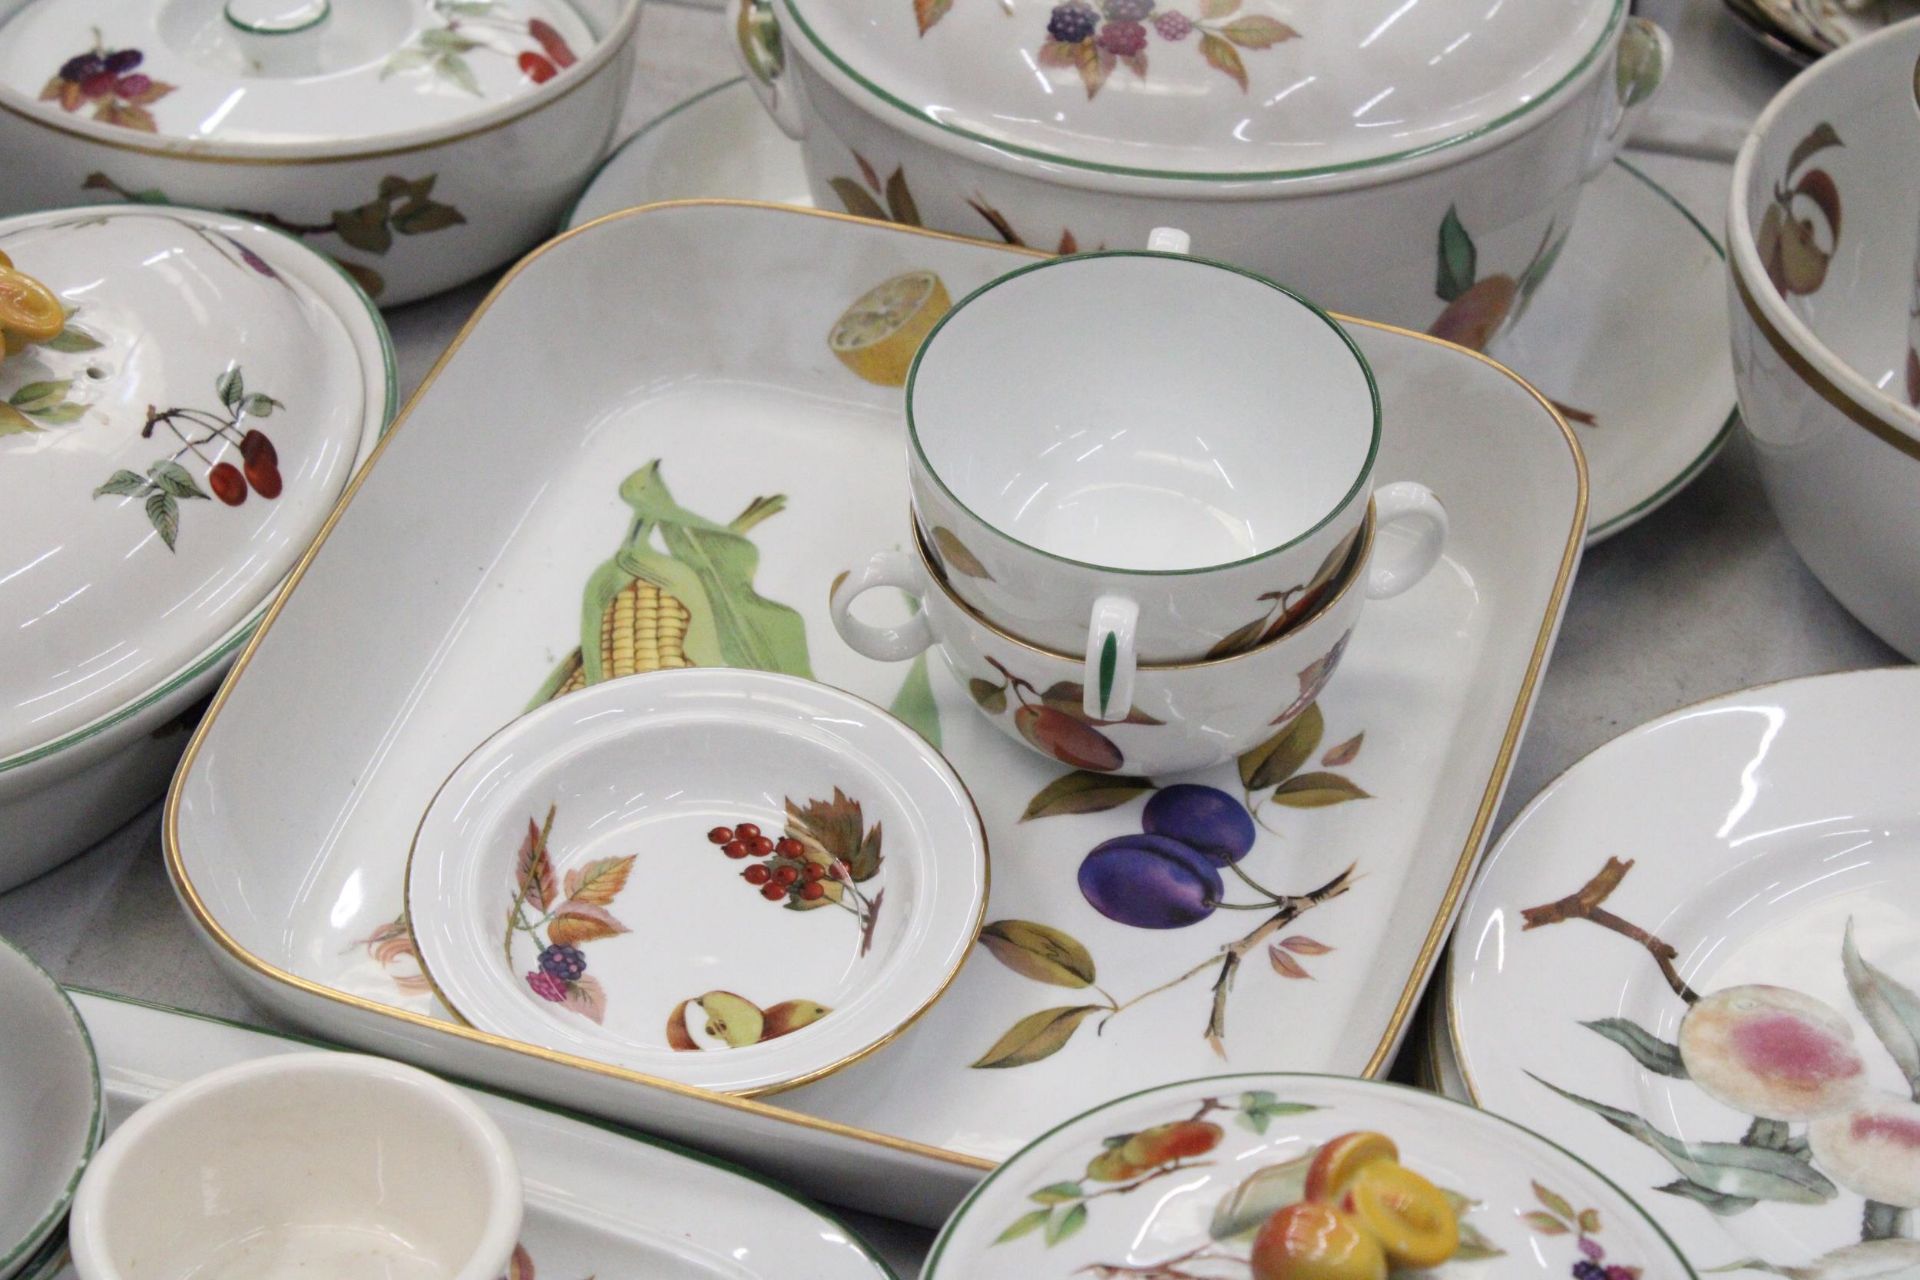 A QUANTITY OF ROYAL WORCESTER WARE TO INCLUDE PLATES, DISHES, PRESERVES JAR ETC - Image 4 of 7